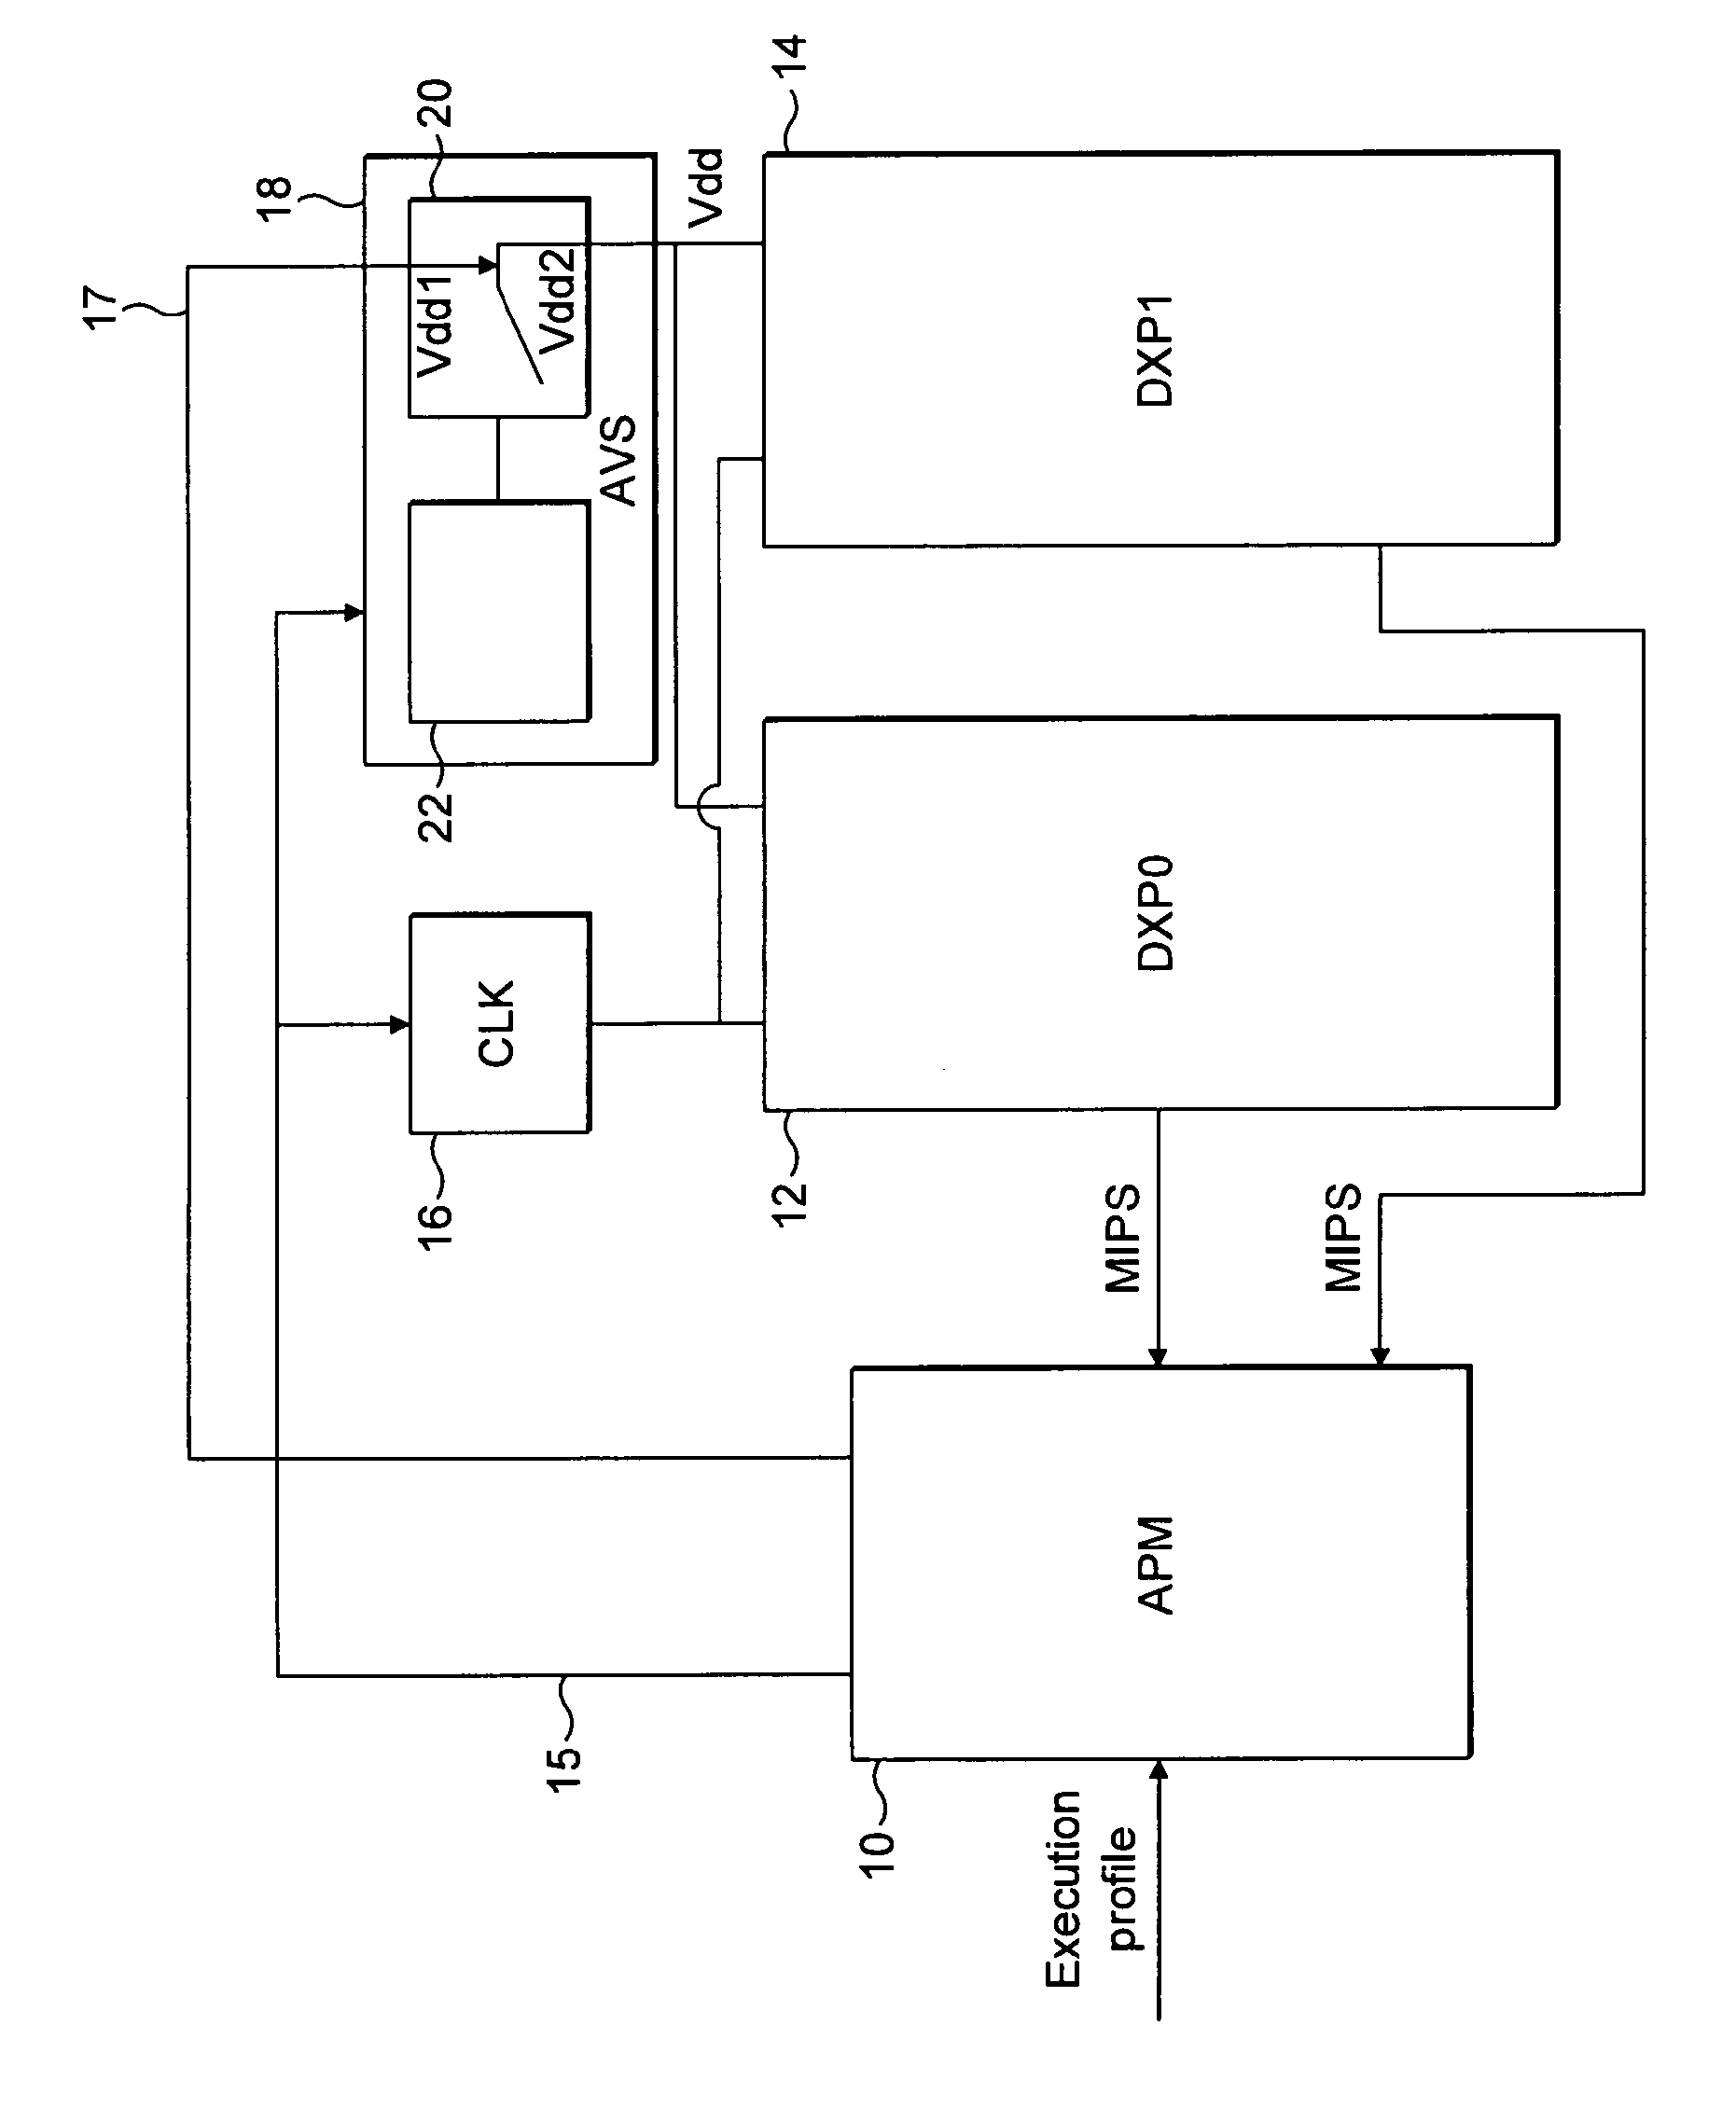 Method and system for controlling clock frequency for active power management